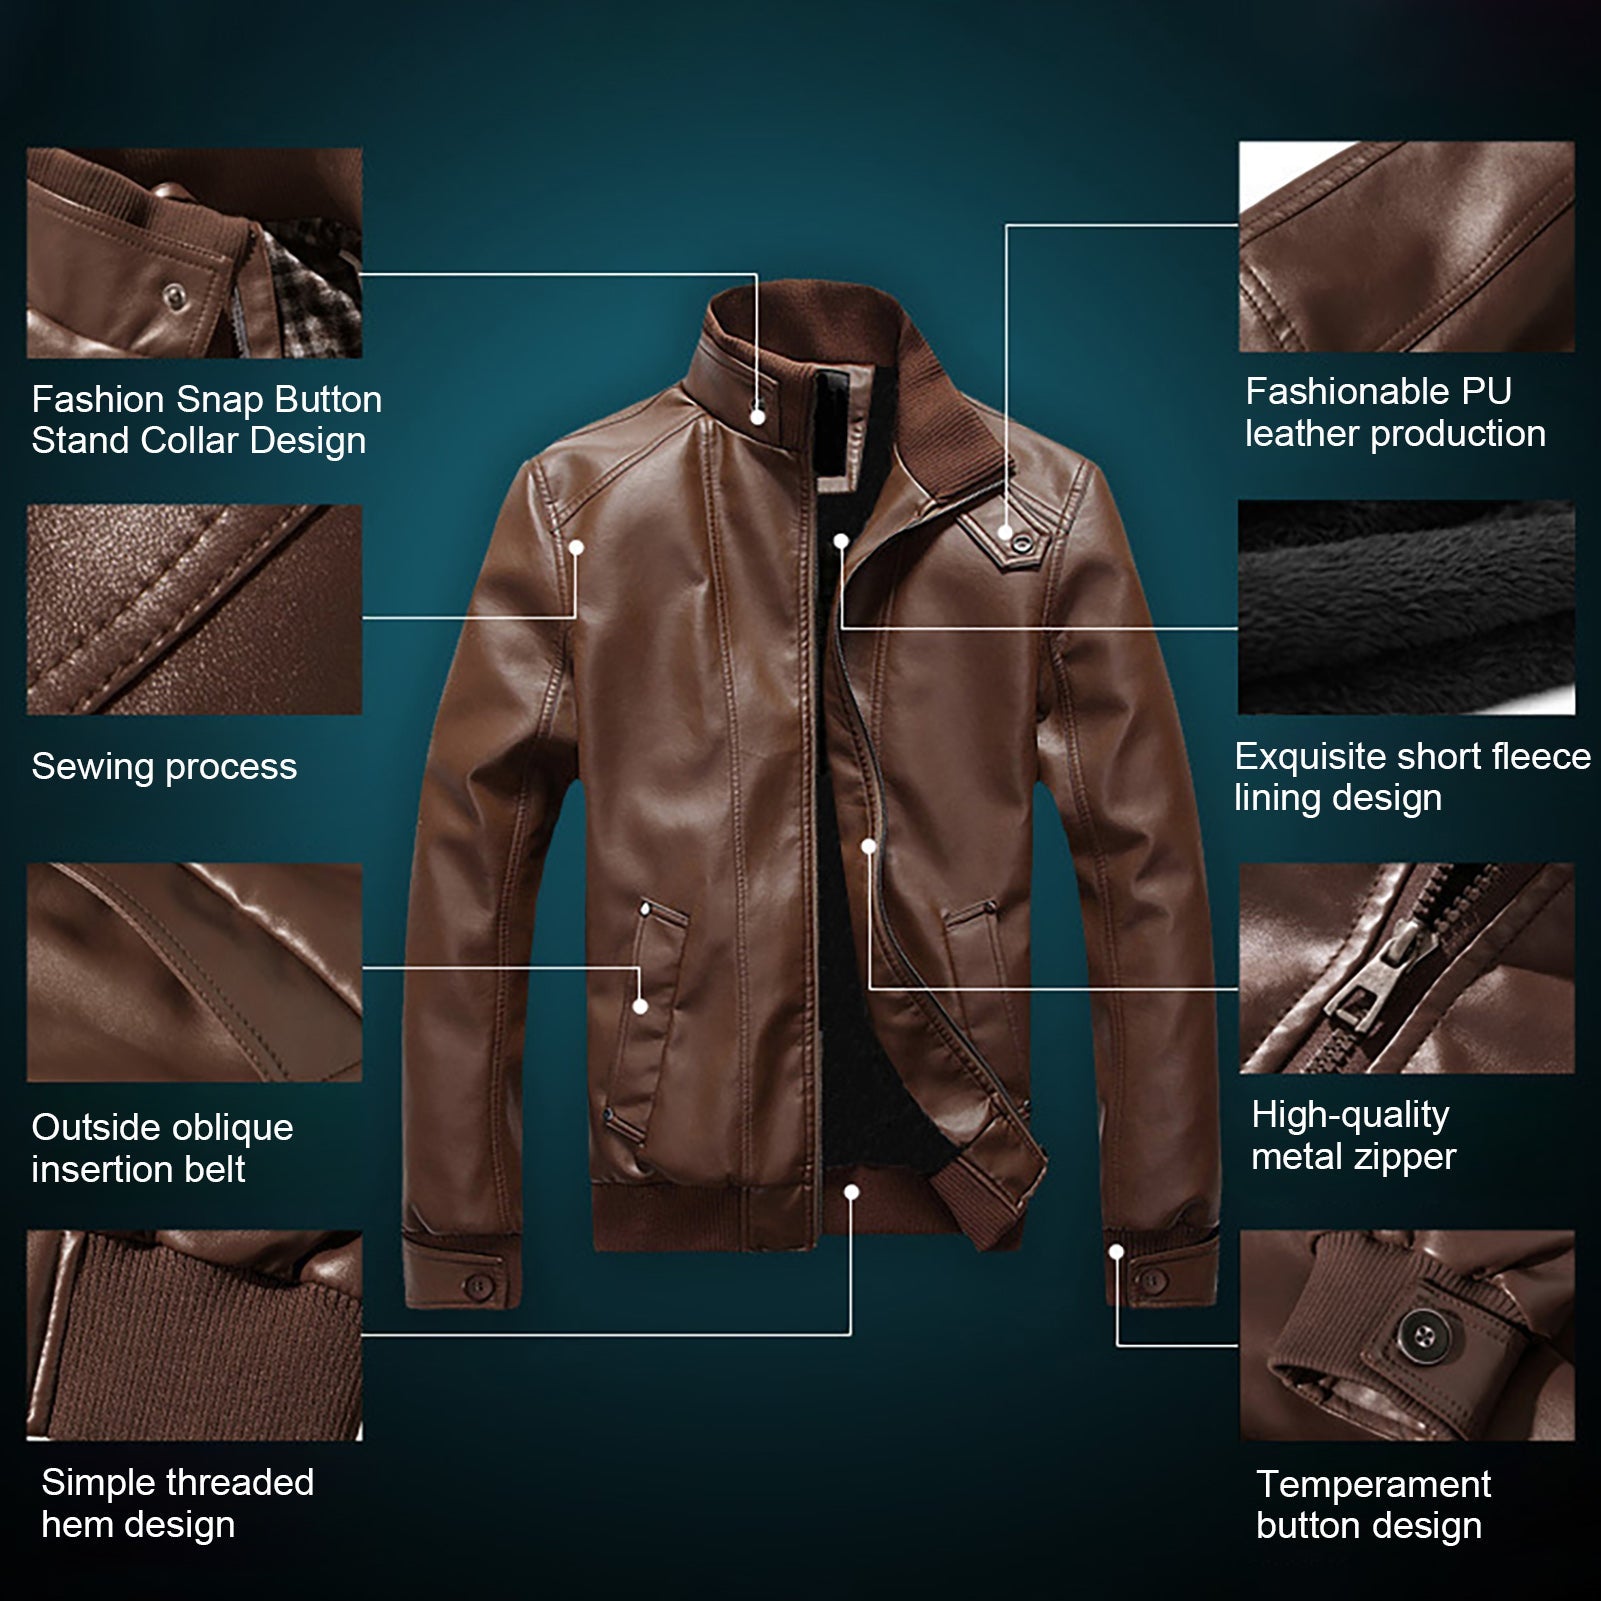 Artificial Leather Solid Color Motorcycle Jacket Zipper Closure Stand Collar Men's Coat